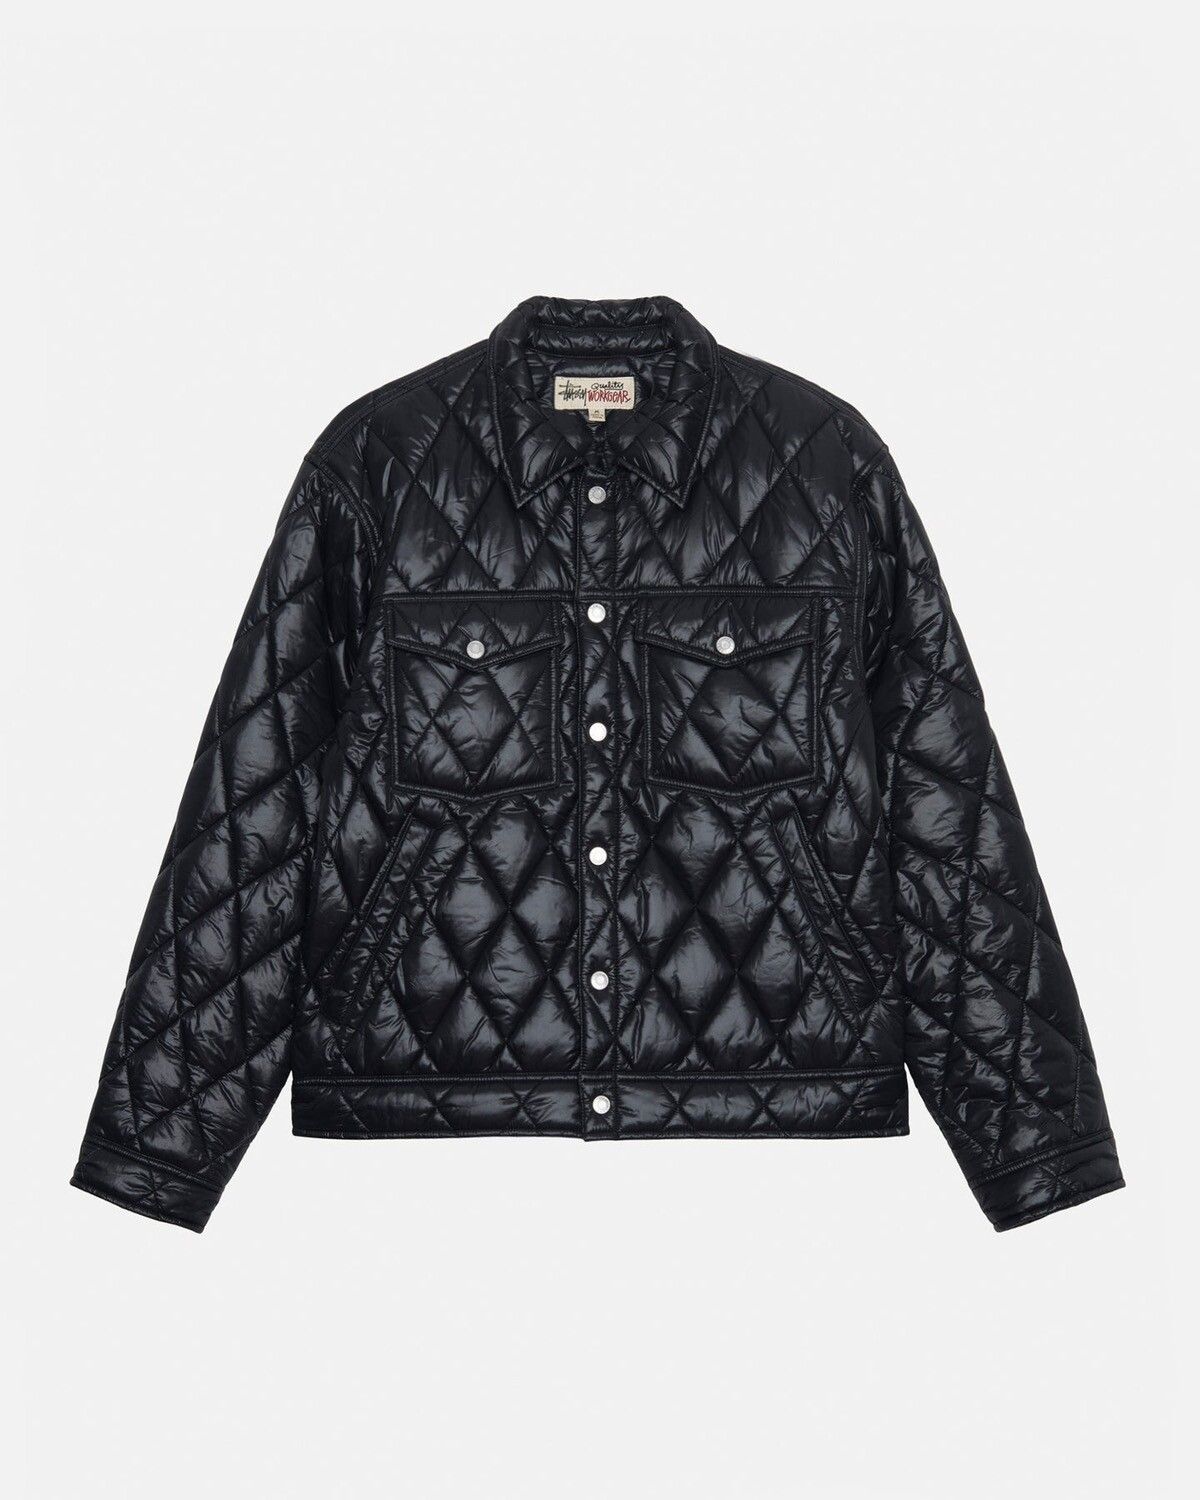 Stussy Stüssy RANCH JACKET QUILTED NYLON Black   Grailed